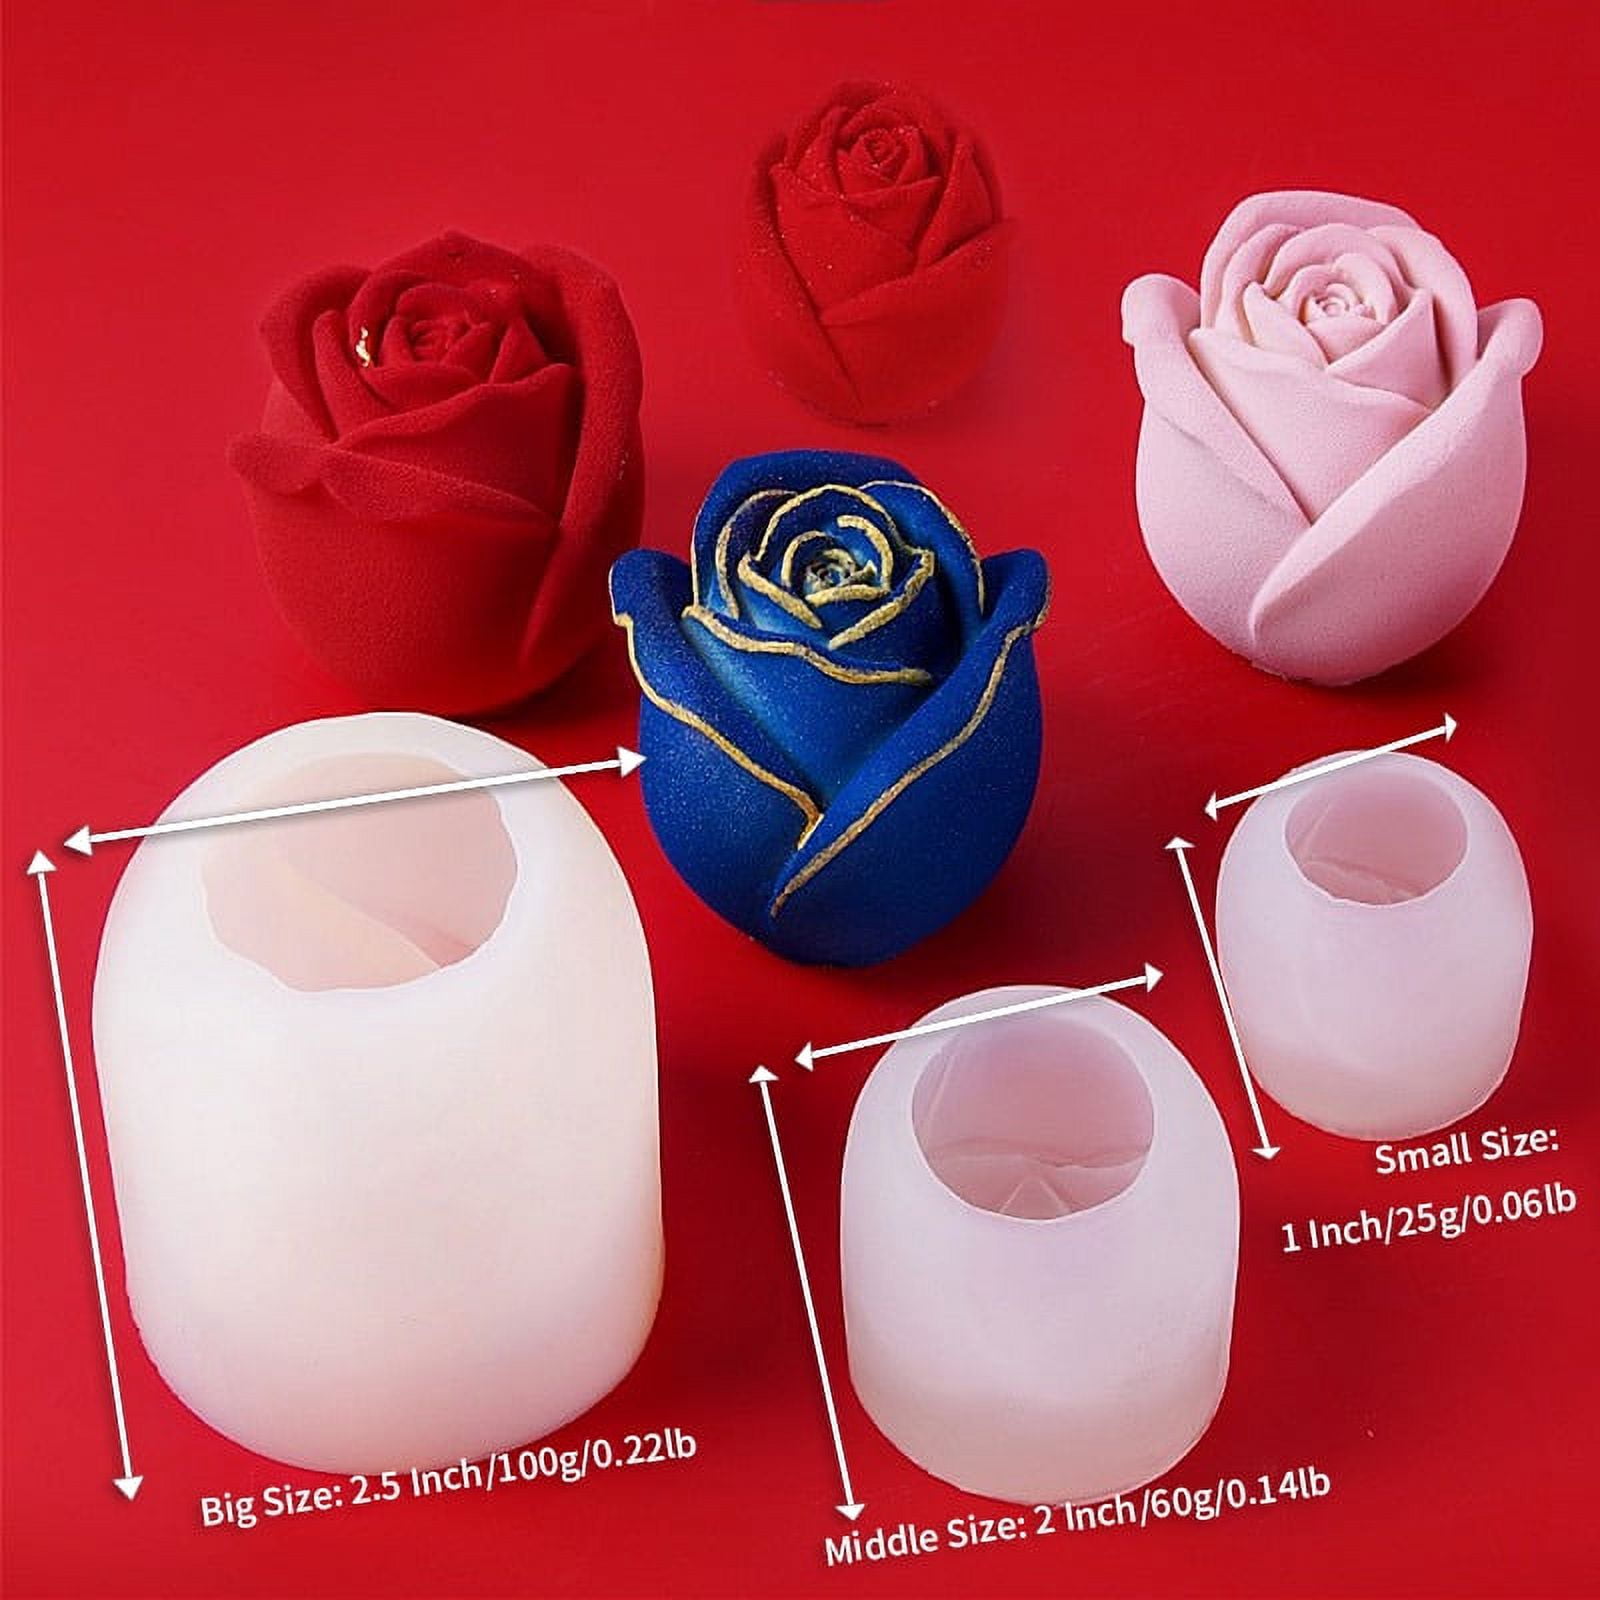 Large Rose Ice Cube Mold 2.5 Inch, Bongpuda Silicone Ice Molds Fun Shapes  Flower, 4 Cavity Cute Ice Ball Maker, Large Ice Cube Trays For Chilling